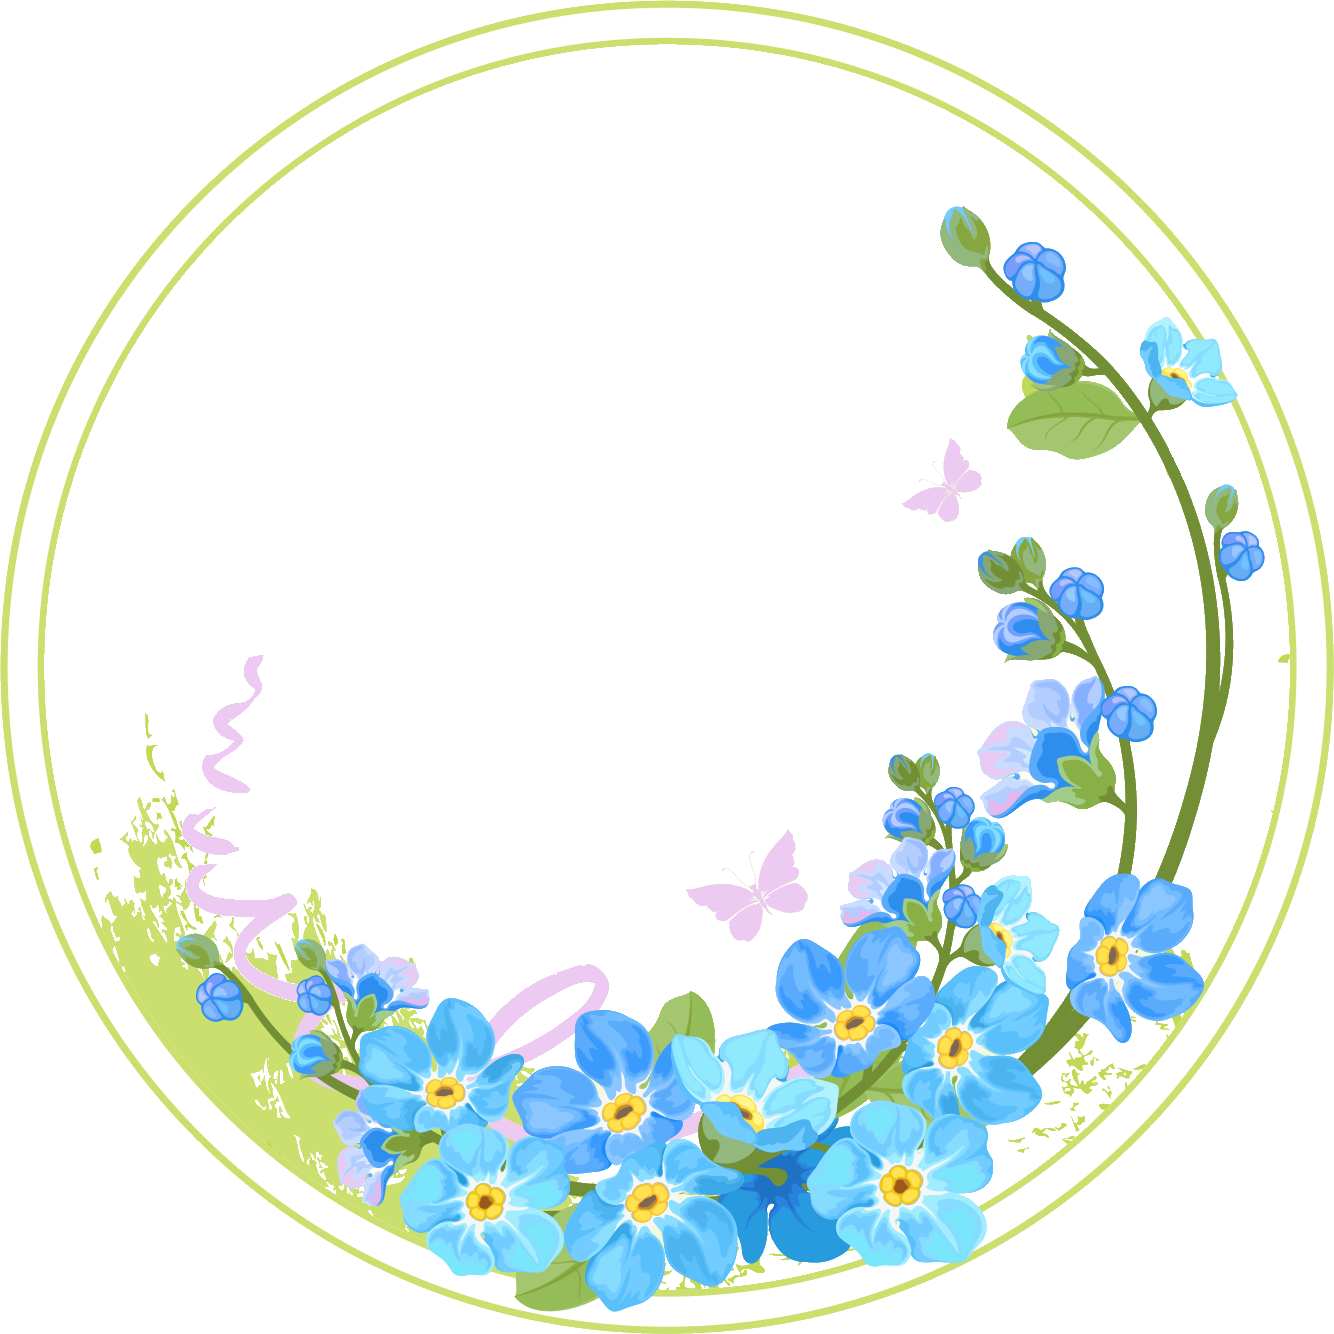 A Circle With Blue Flowers And Butterflies